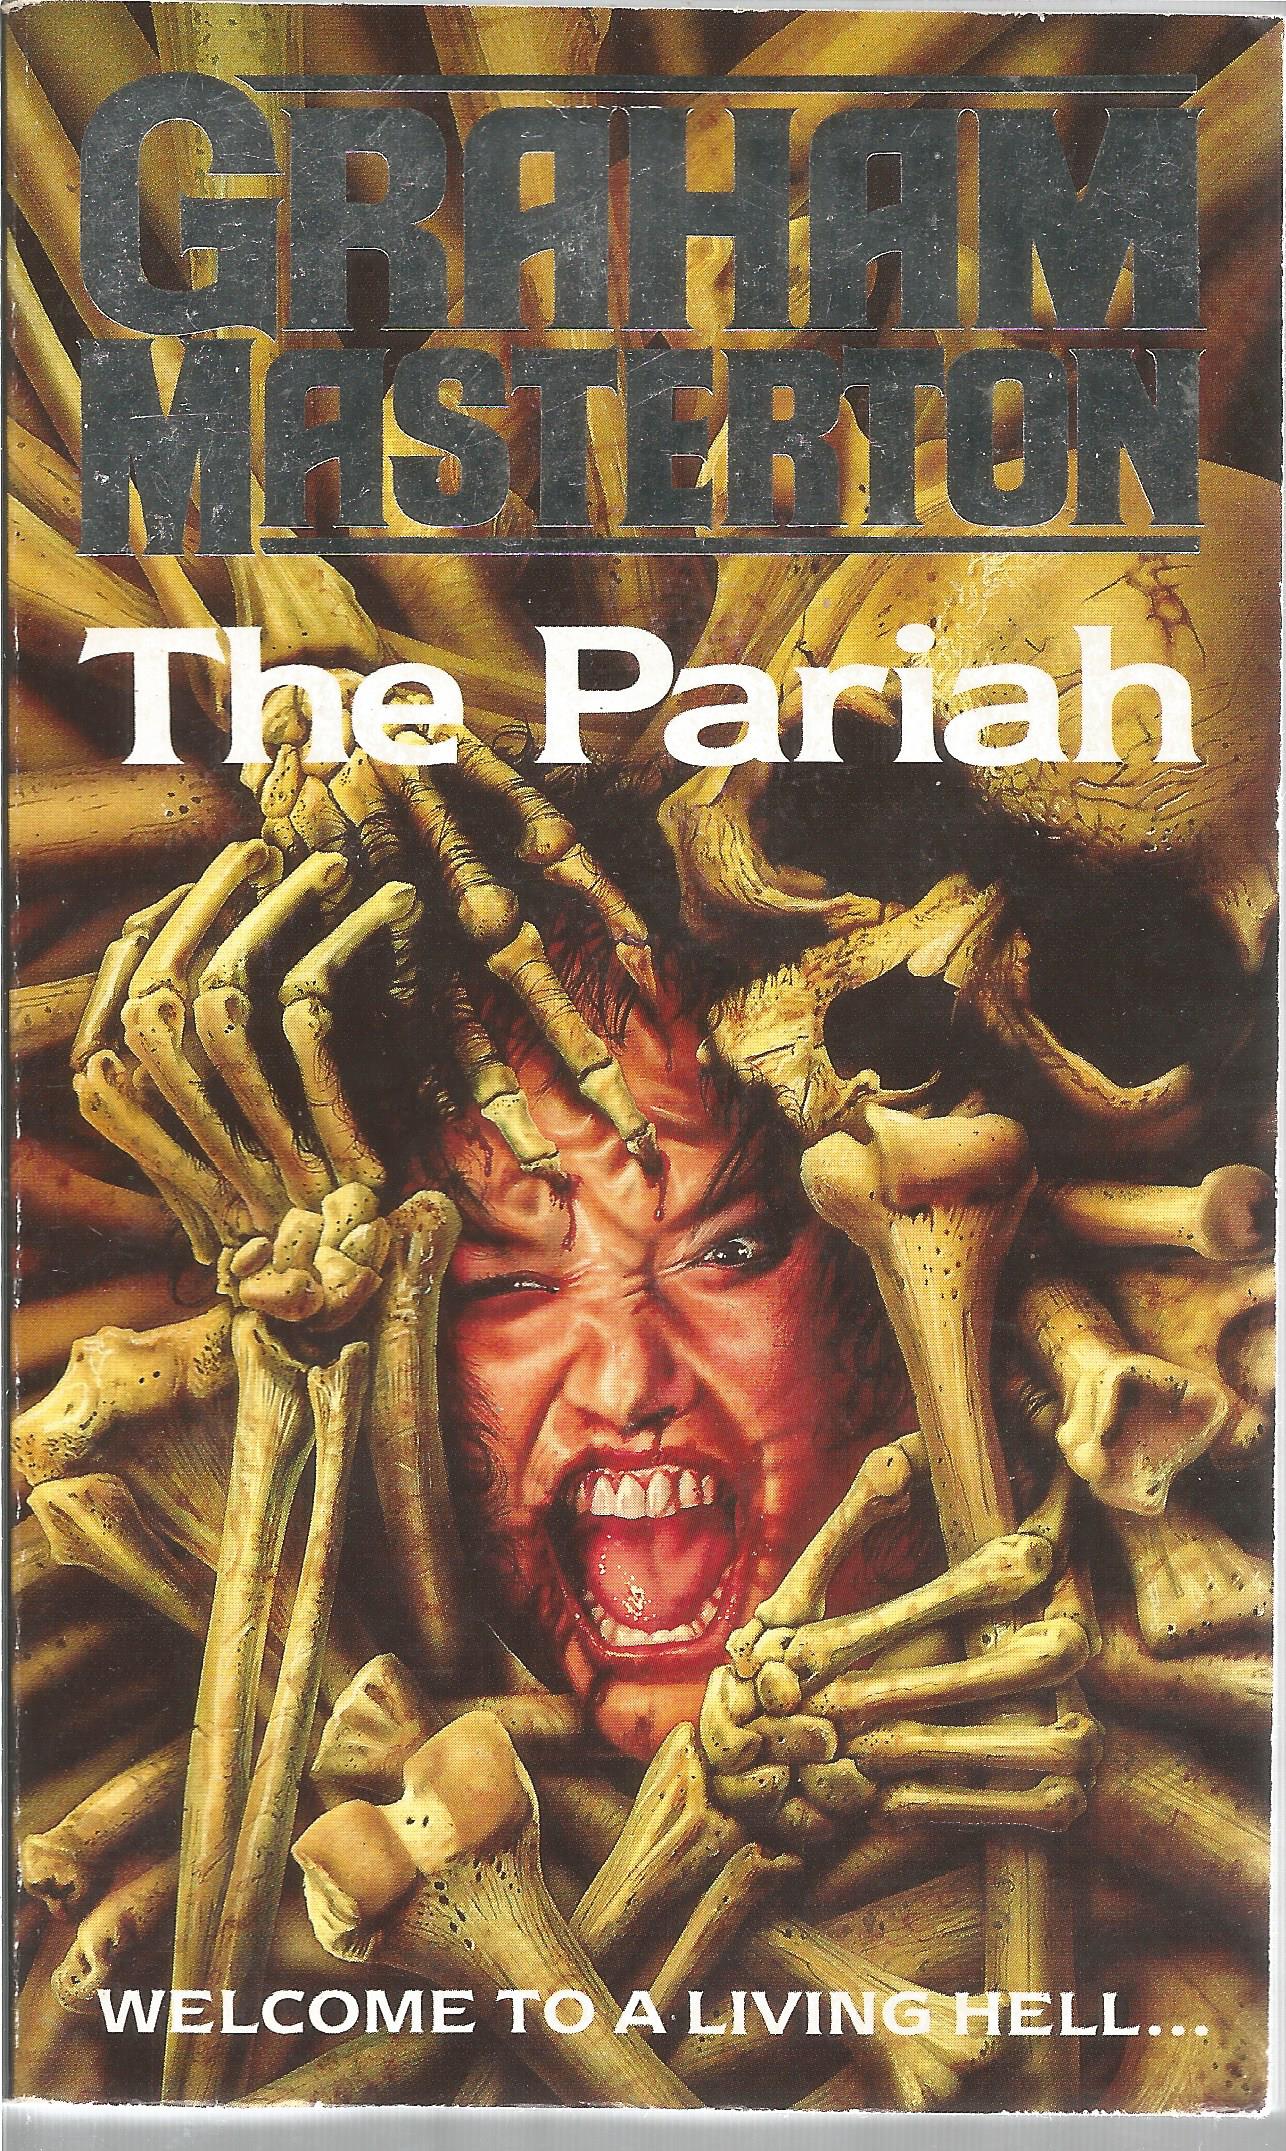 Graham Masterton signed book The Pariah Welcome to a living hell… Good condition book. Signed on